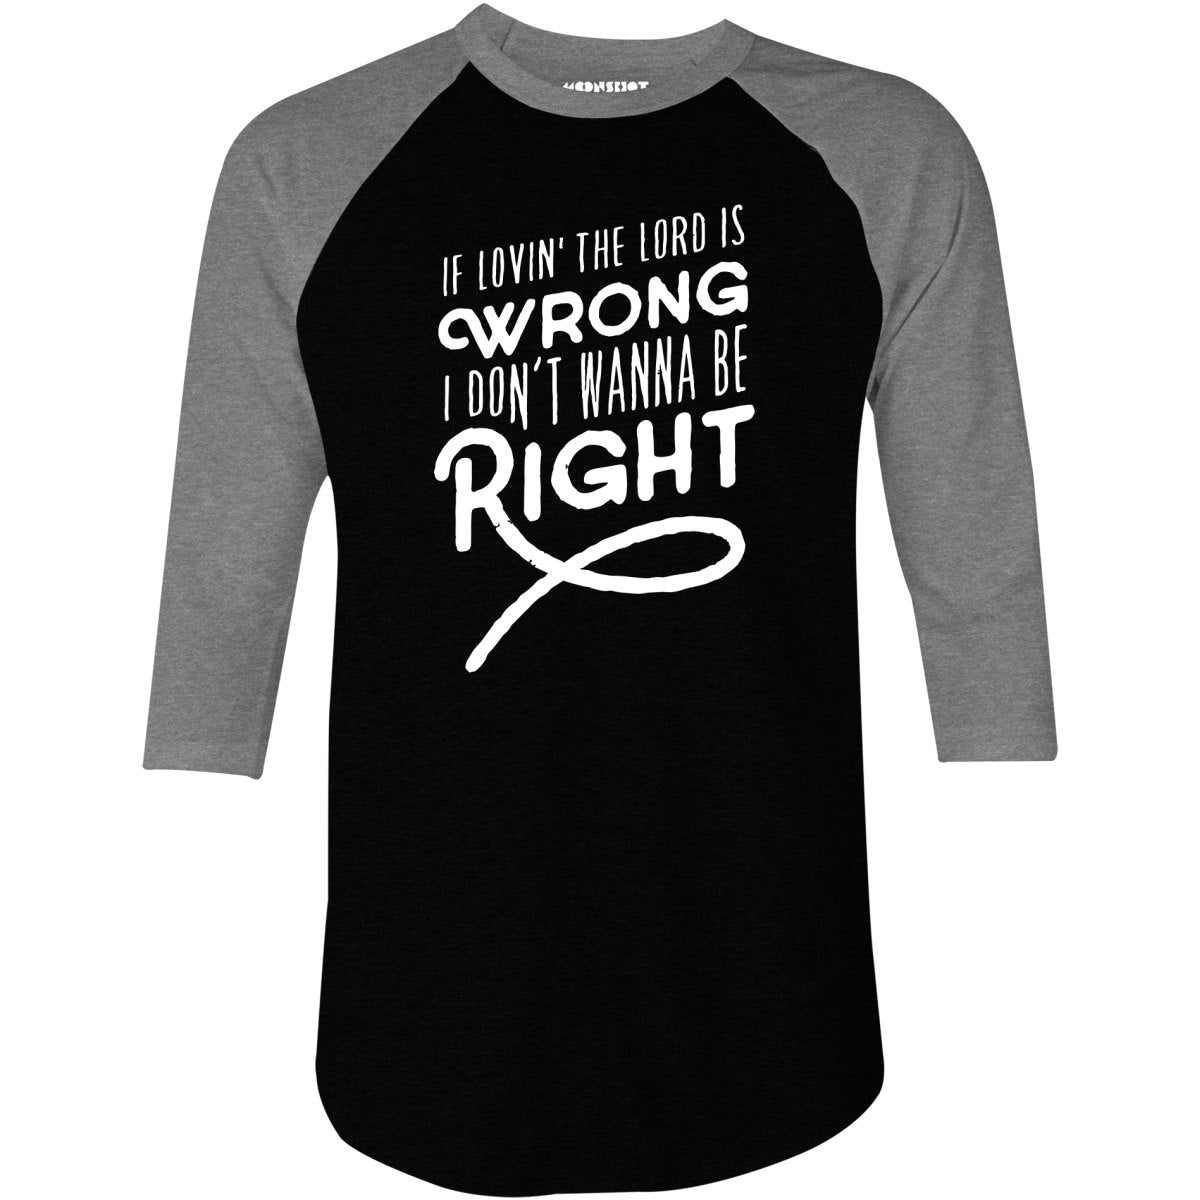 If Lovin the Lord is Wrong I Don't Wanna Be Right - 3/4 Sleeve Raglan T-Shirt